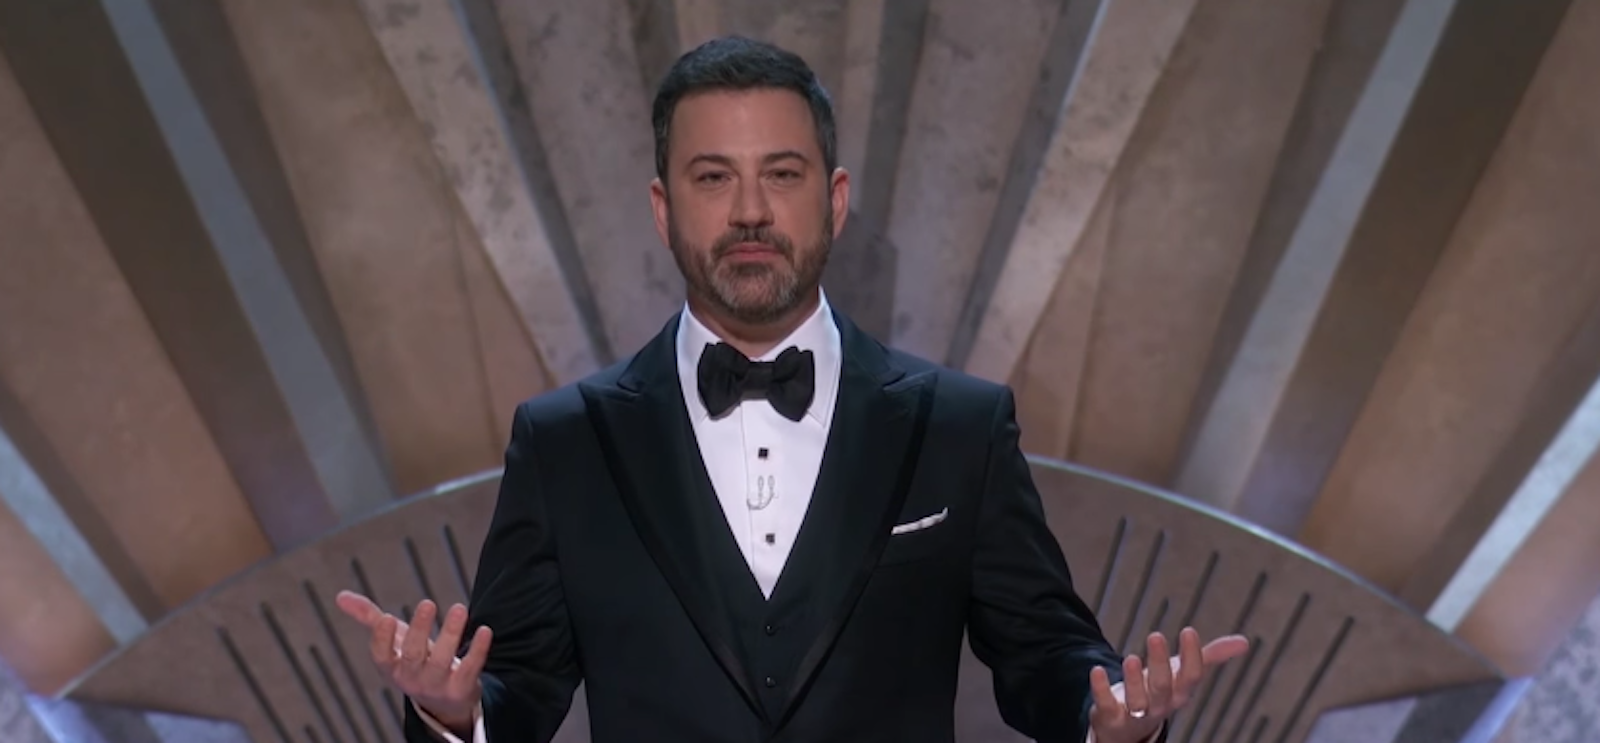 Jimmy Kimmel in a black tux onstage hosting the 2018 Oscars